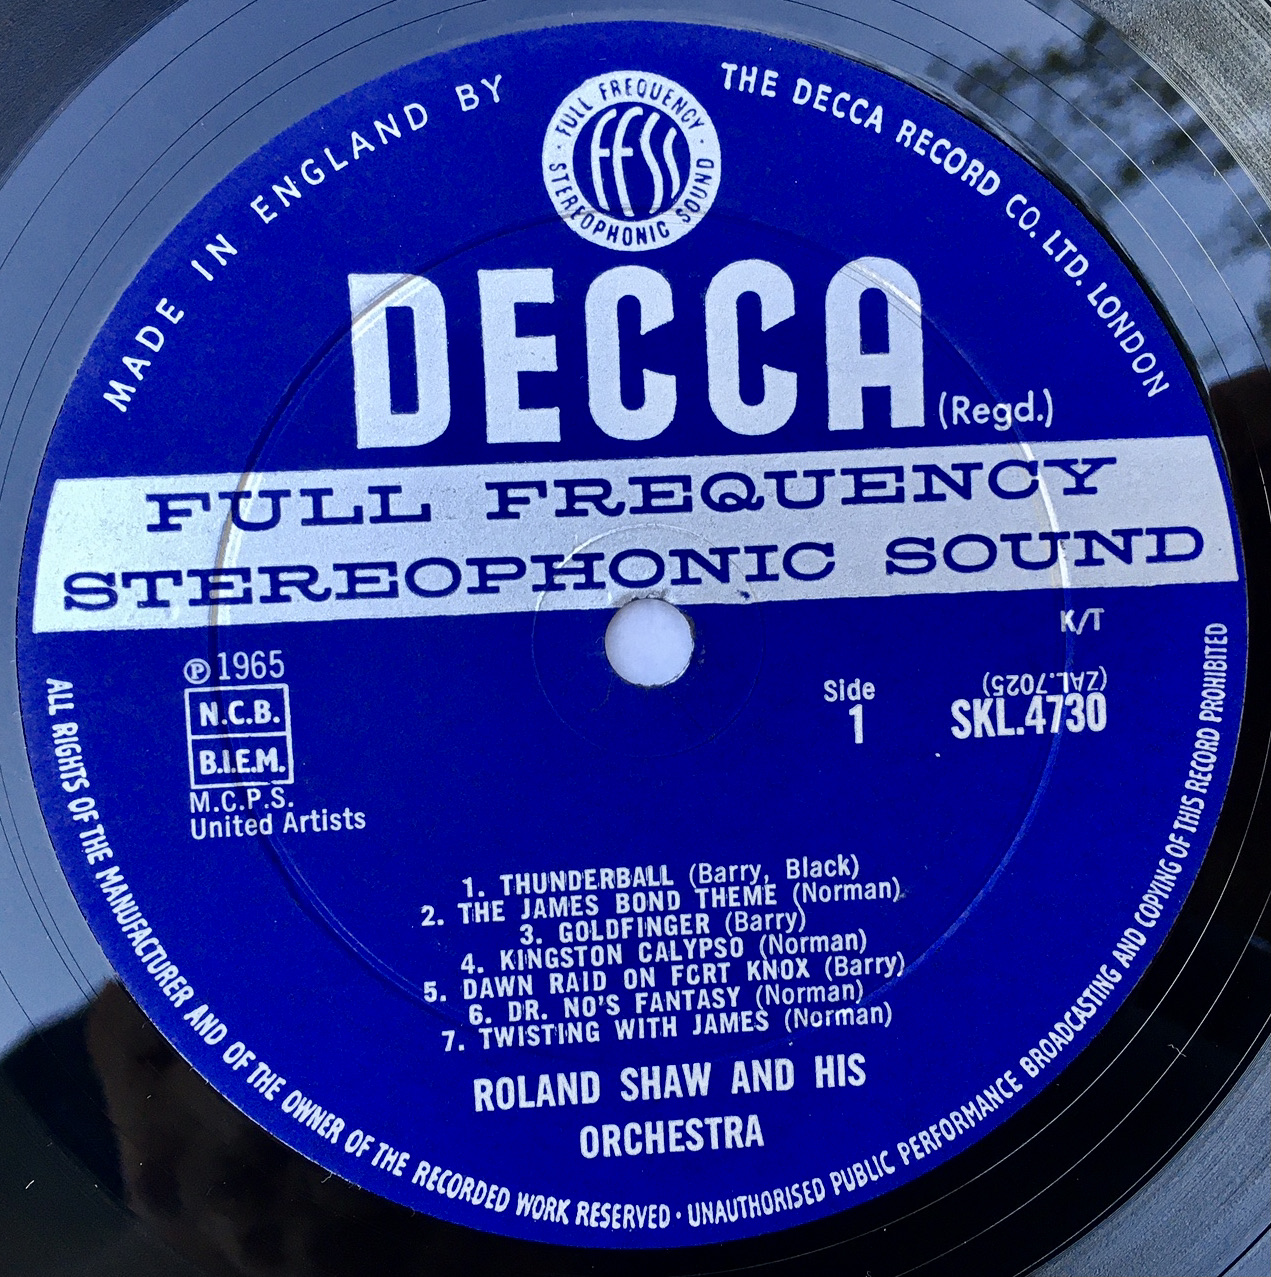 Decca Phase 4 stereo early blue record label